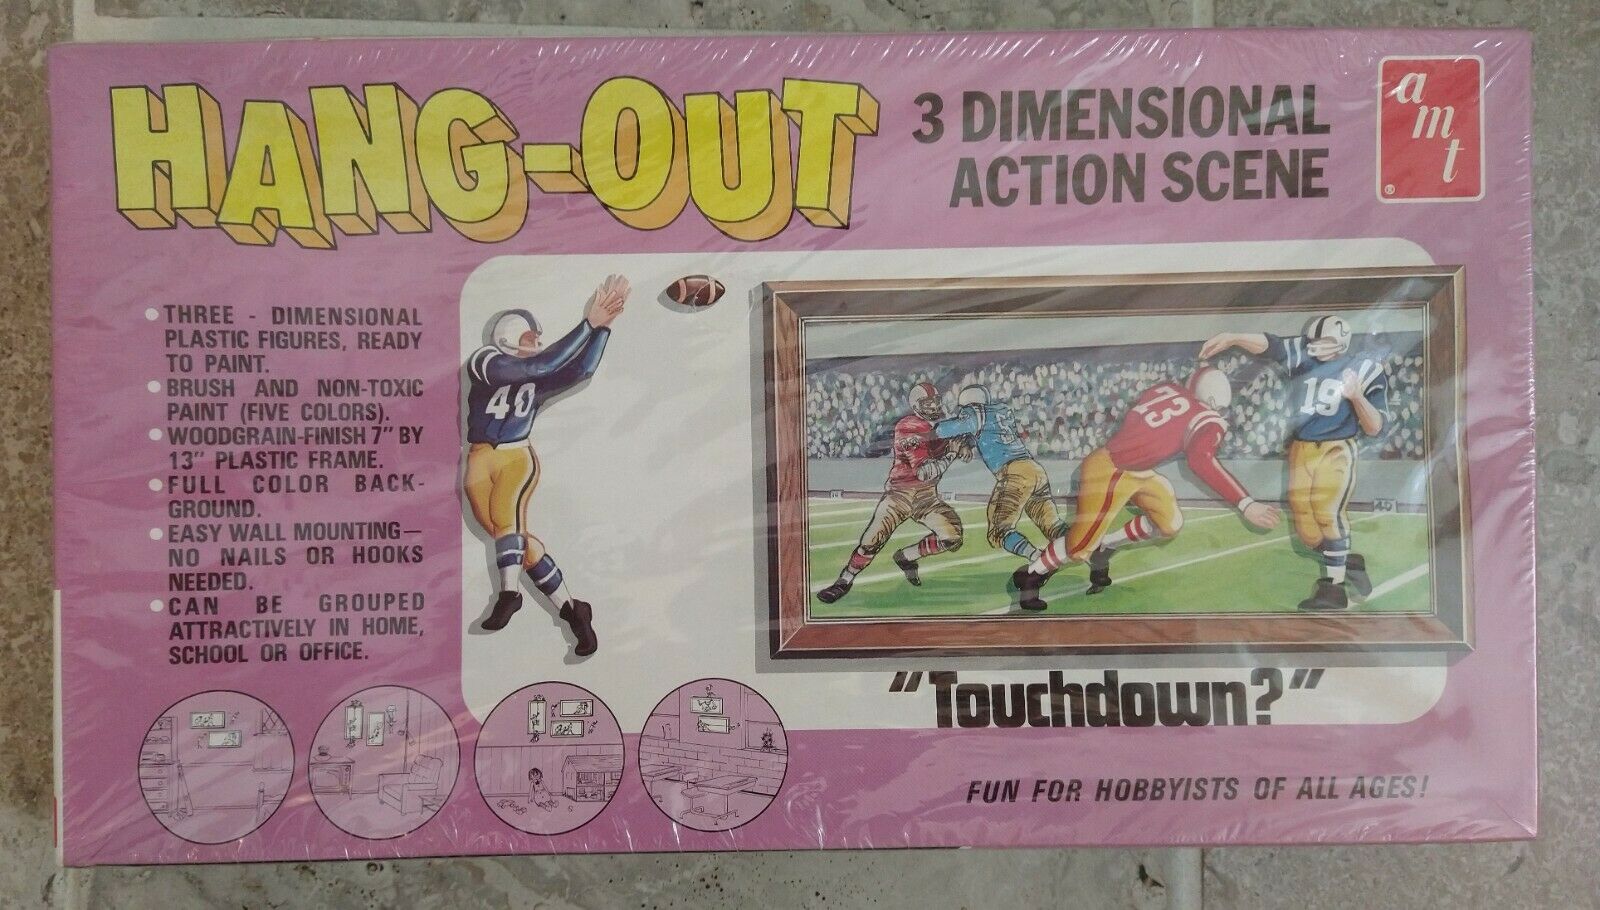 Vintage "hang-out" 3-d Football Picture "touchdown?" By Amt Corp. New Old Stock